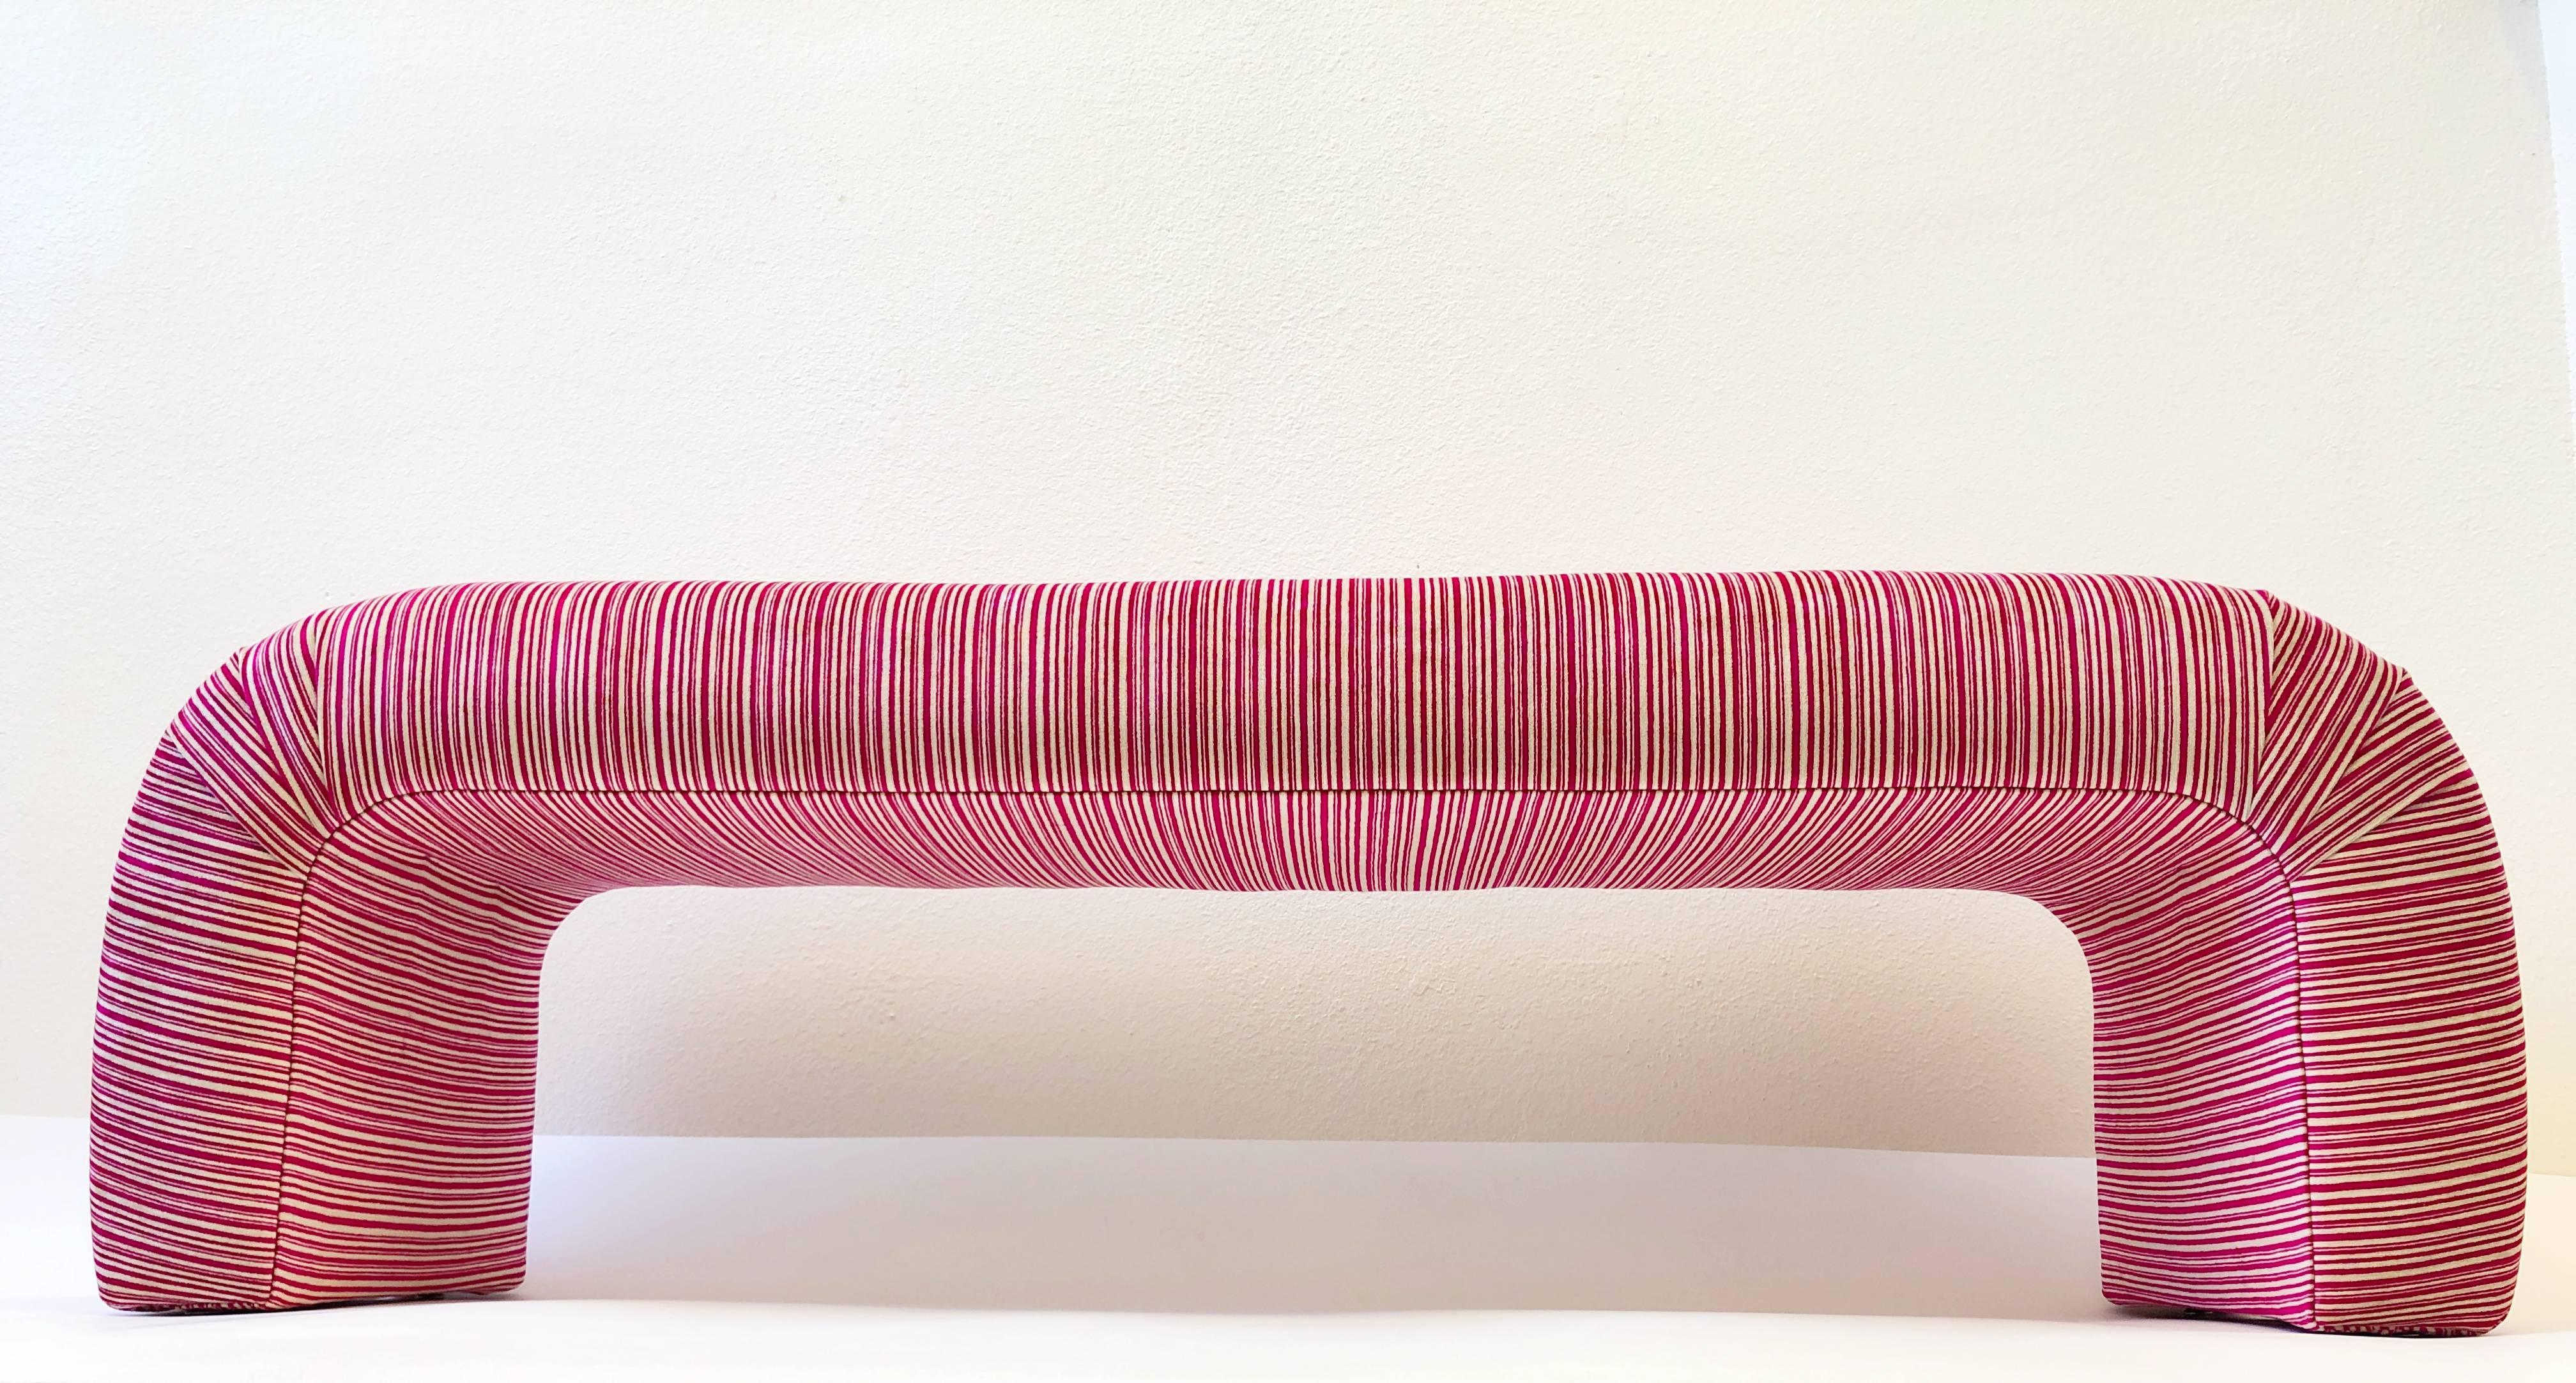 A glamorous 1980s newly reupholstered waterfall bench by Steve Chase.
The bench has been upholstered fushia and off-white striped soft velvet (see detail photos). If you wish to have it recovered n a different fabric? Lease let us